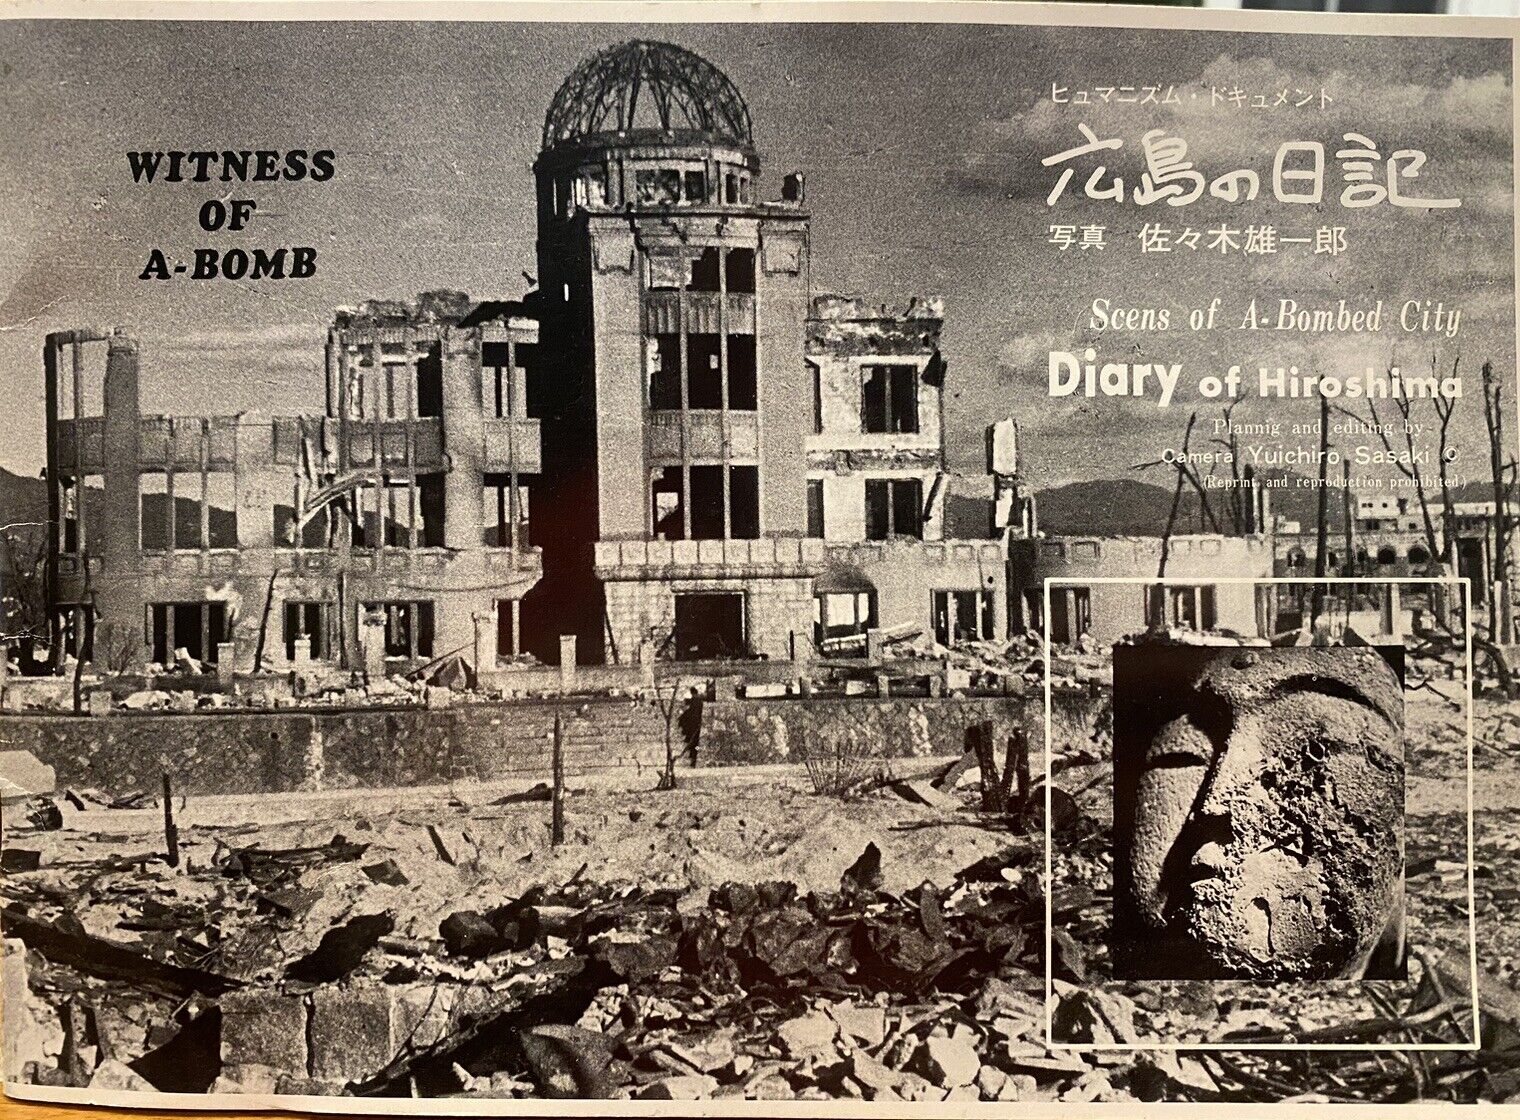 Witness Of A-Bomb: Scens Of A-Bombed City (1953) By Yuchiro Sasaki: Rare Book